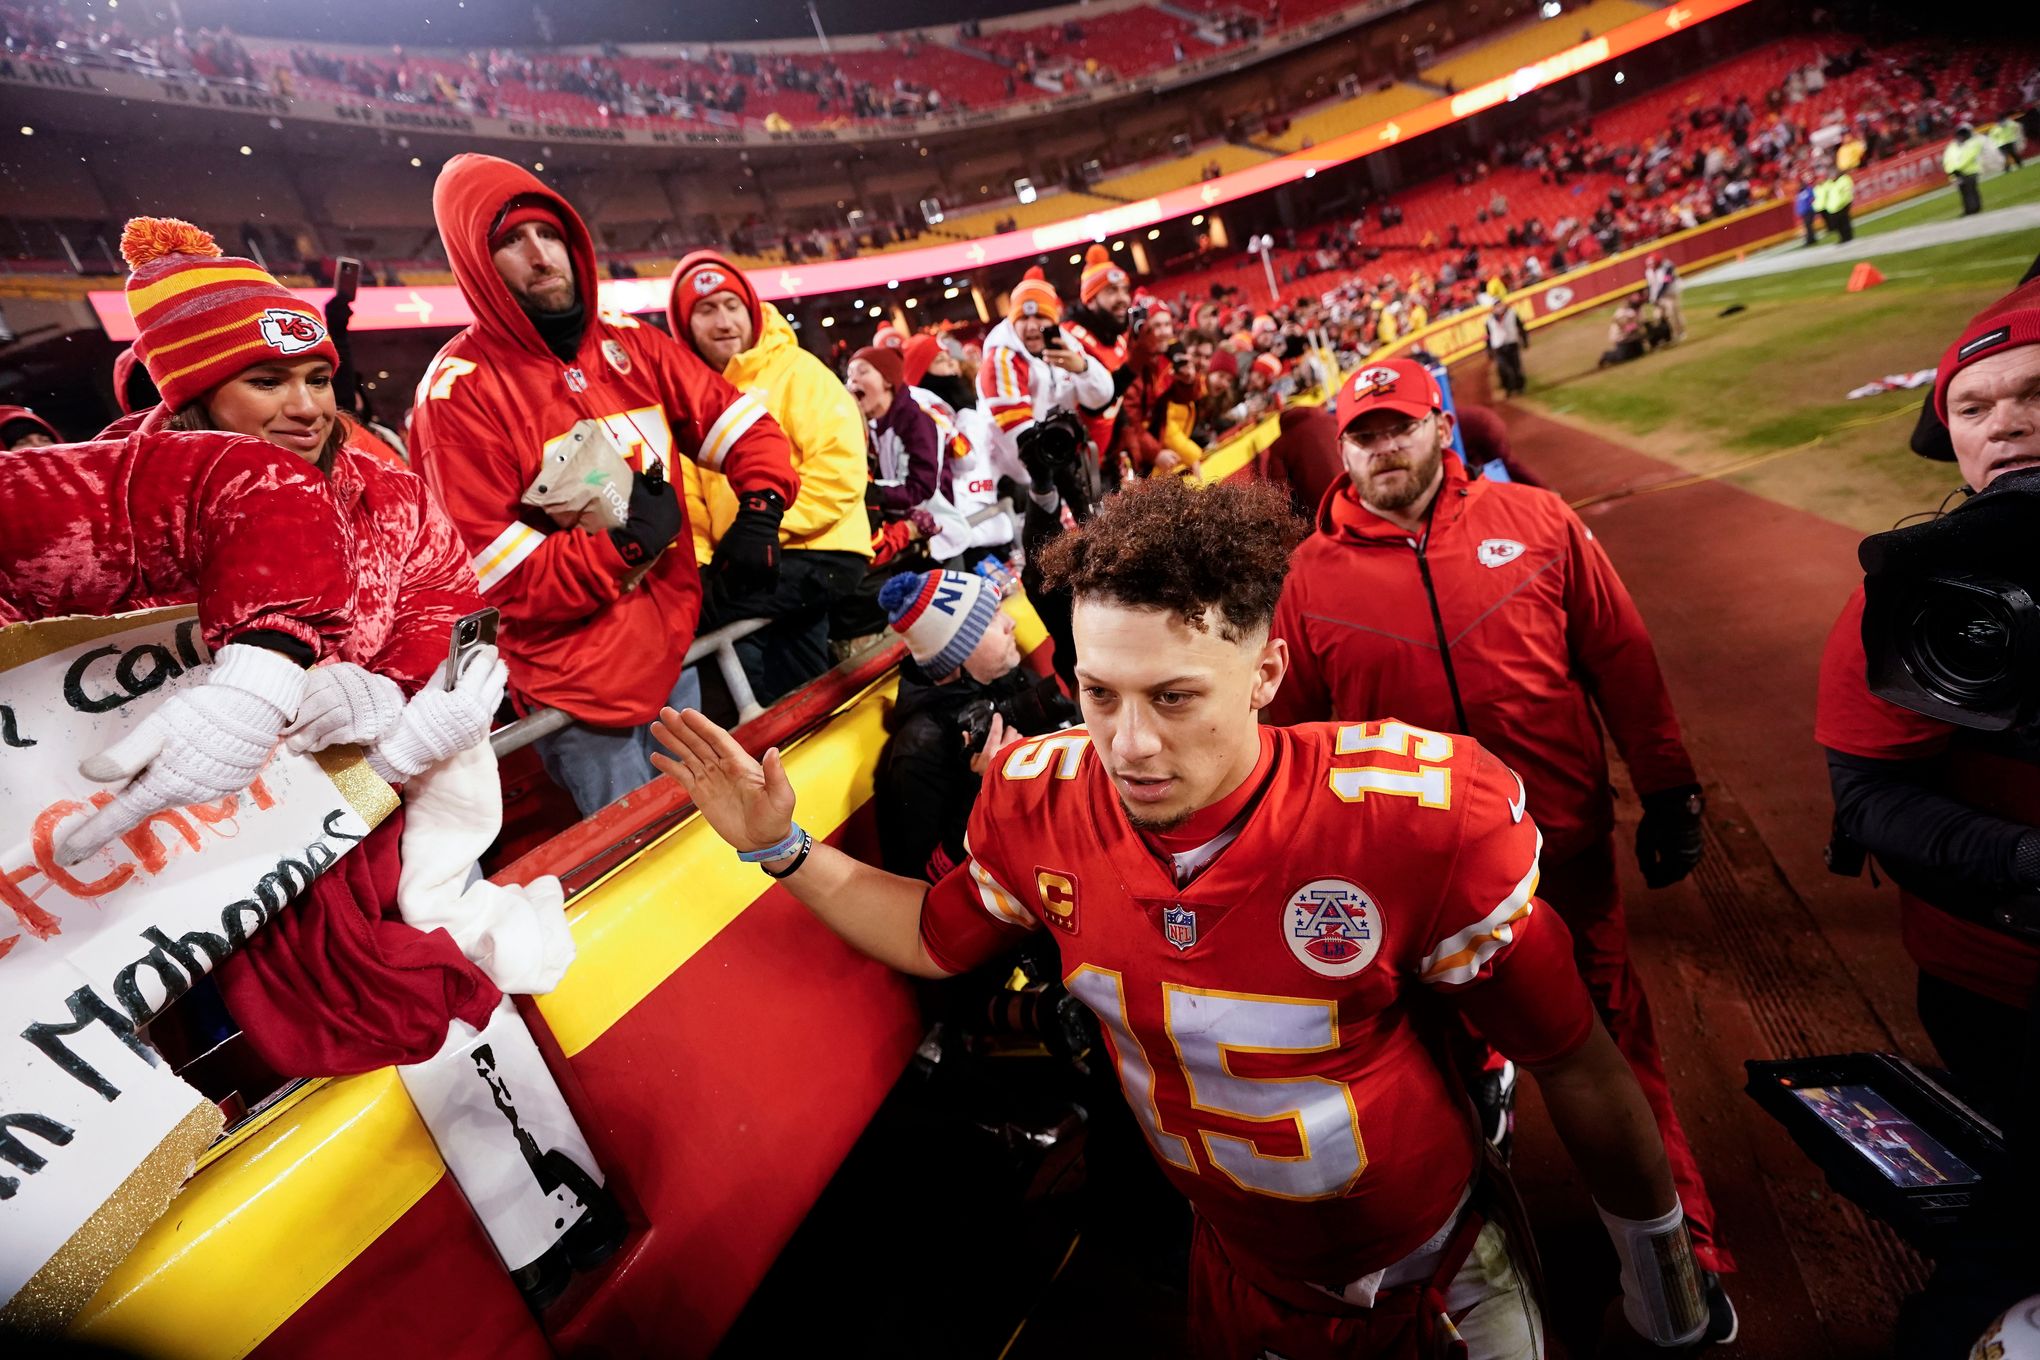 Patrick Mahomes says his ankle injury won't hold him back from